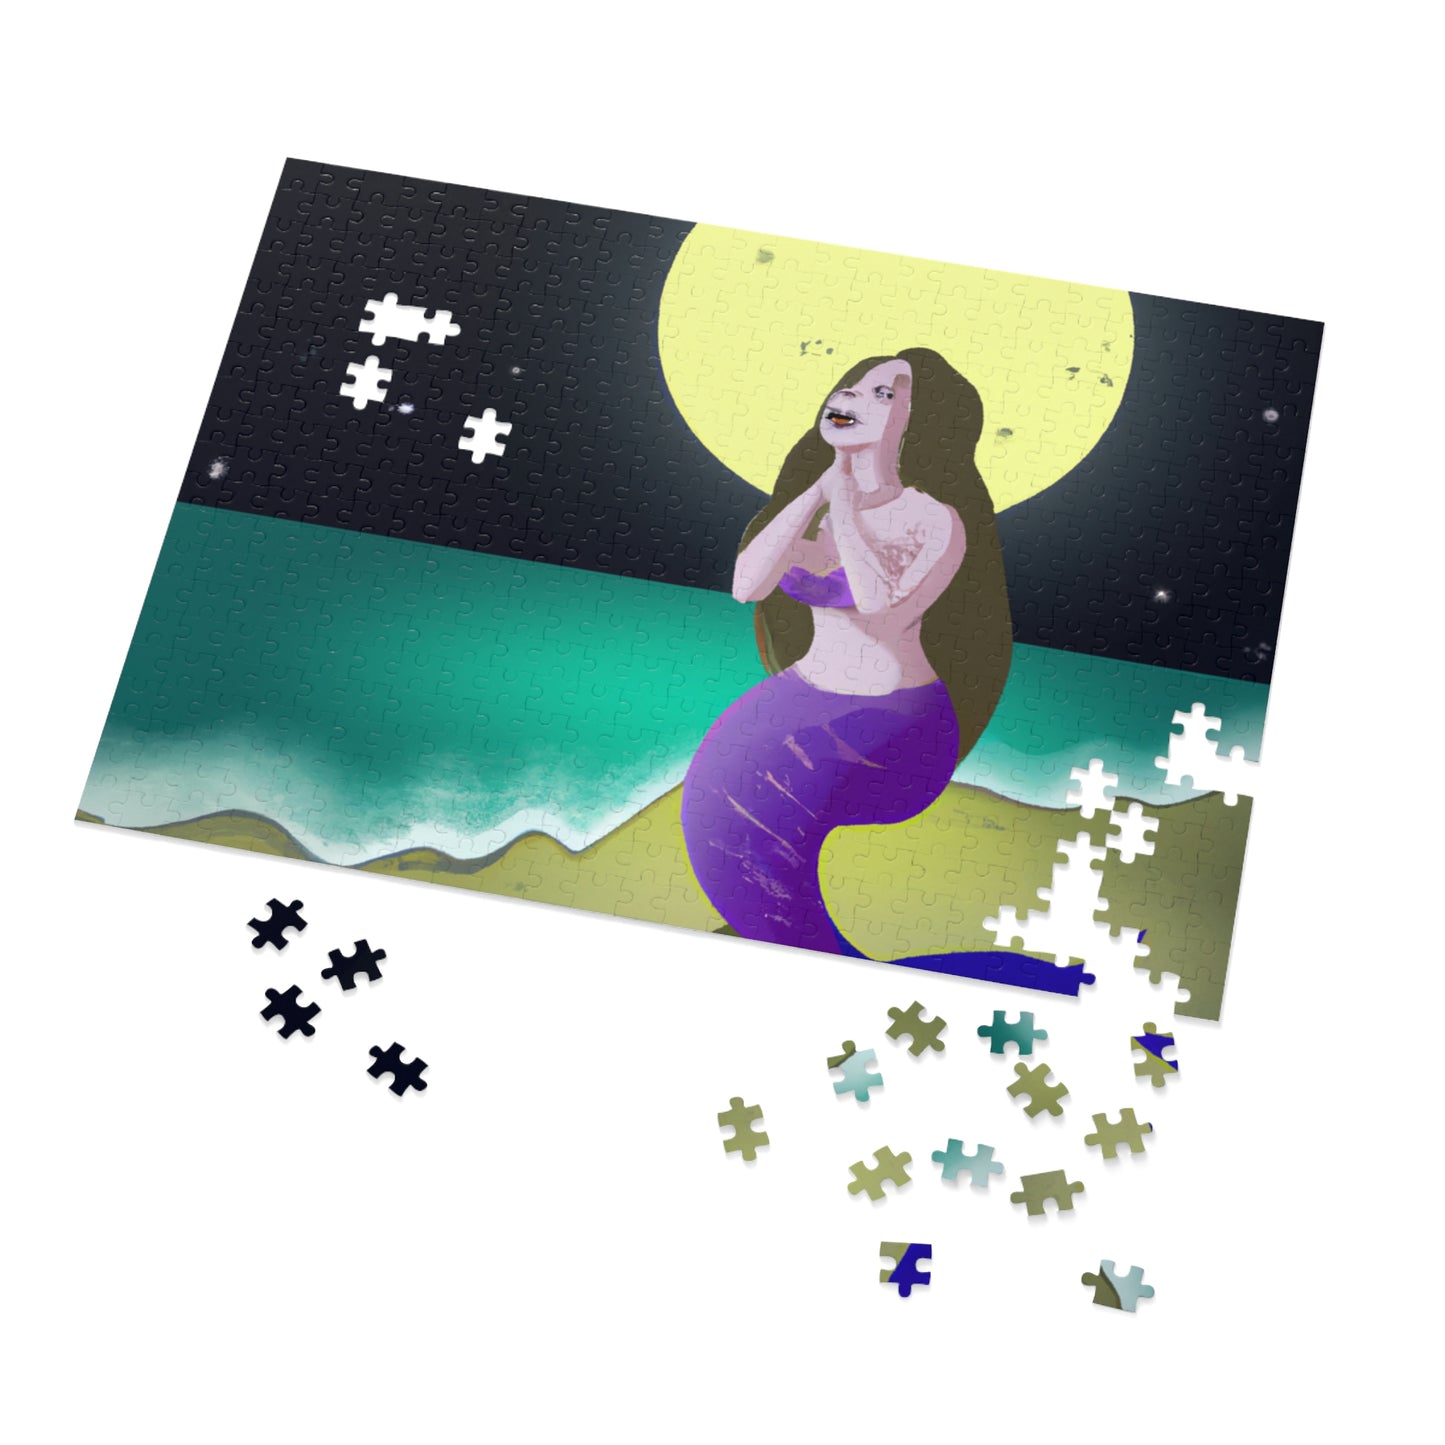 "The Mermaid's Lament" - The Alien Jigsaw Puzzle